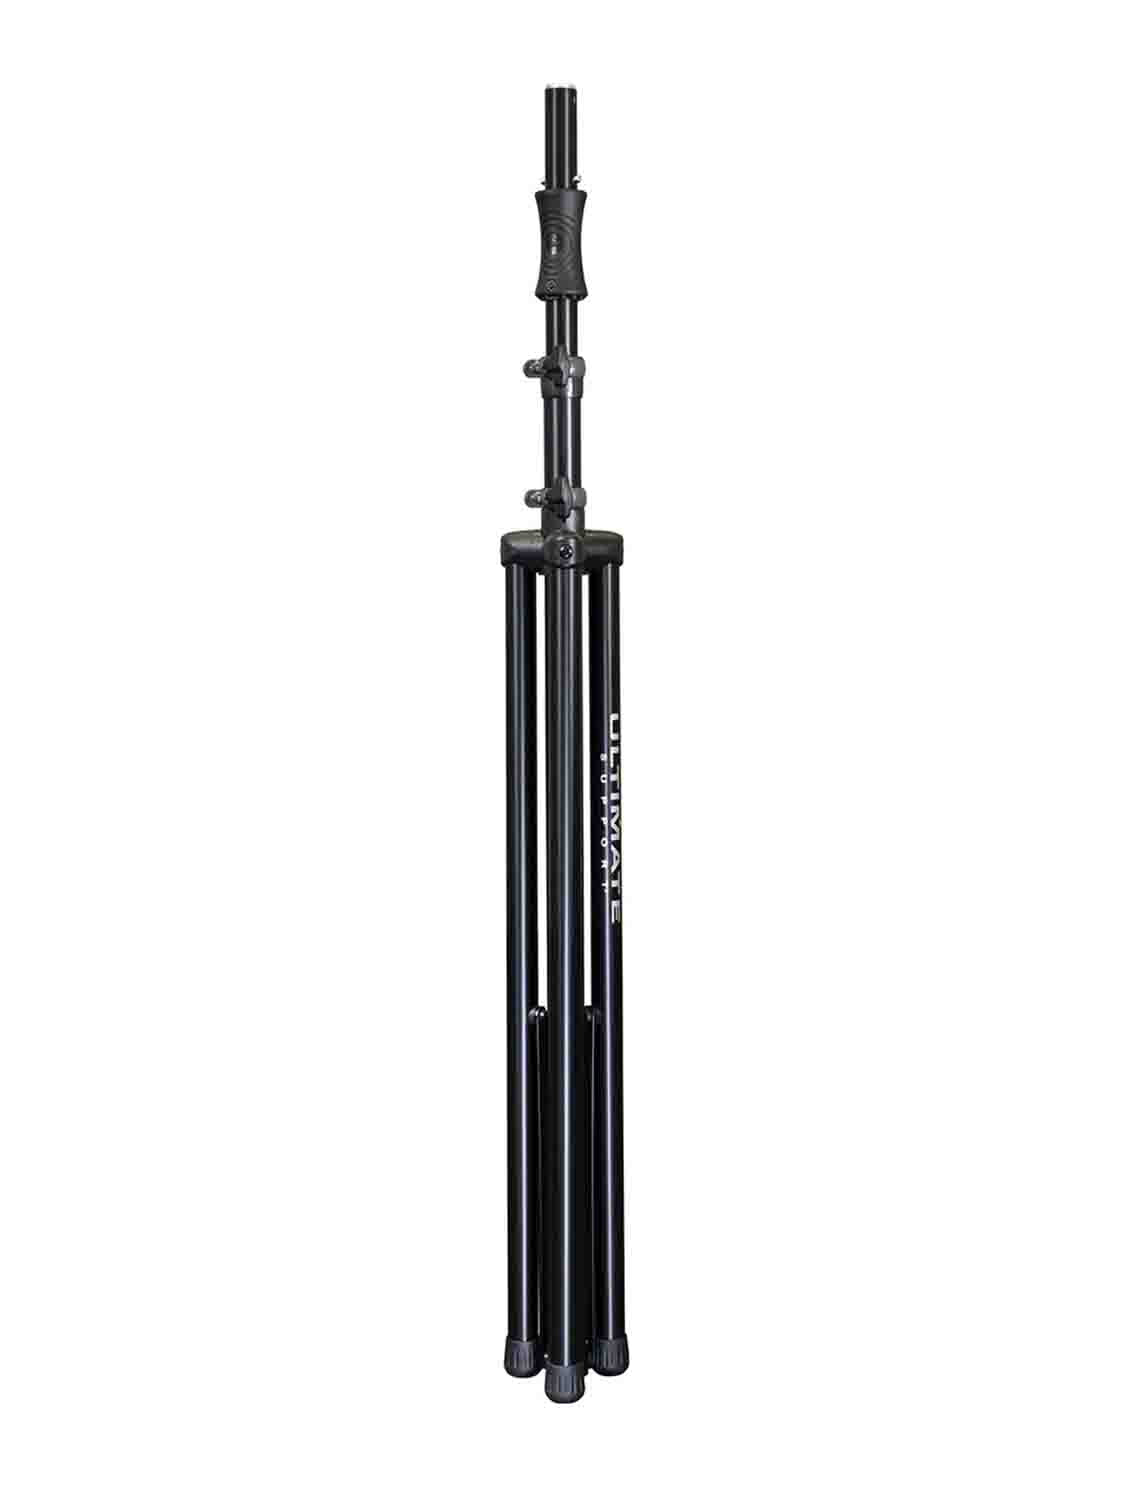 Ultimate Support TS-110B Extra Tall Lift-Assist Tripod Speaker Stand with Integrated Adapter - Hollywood DJ